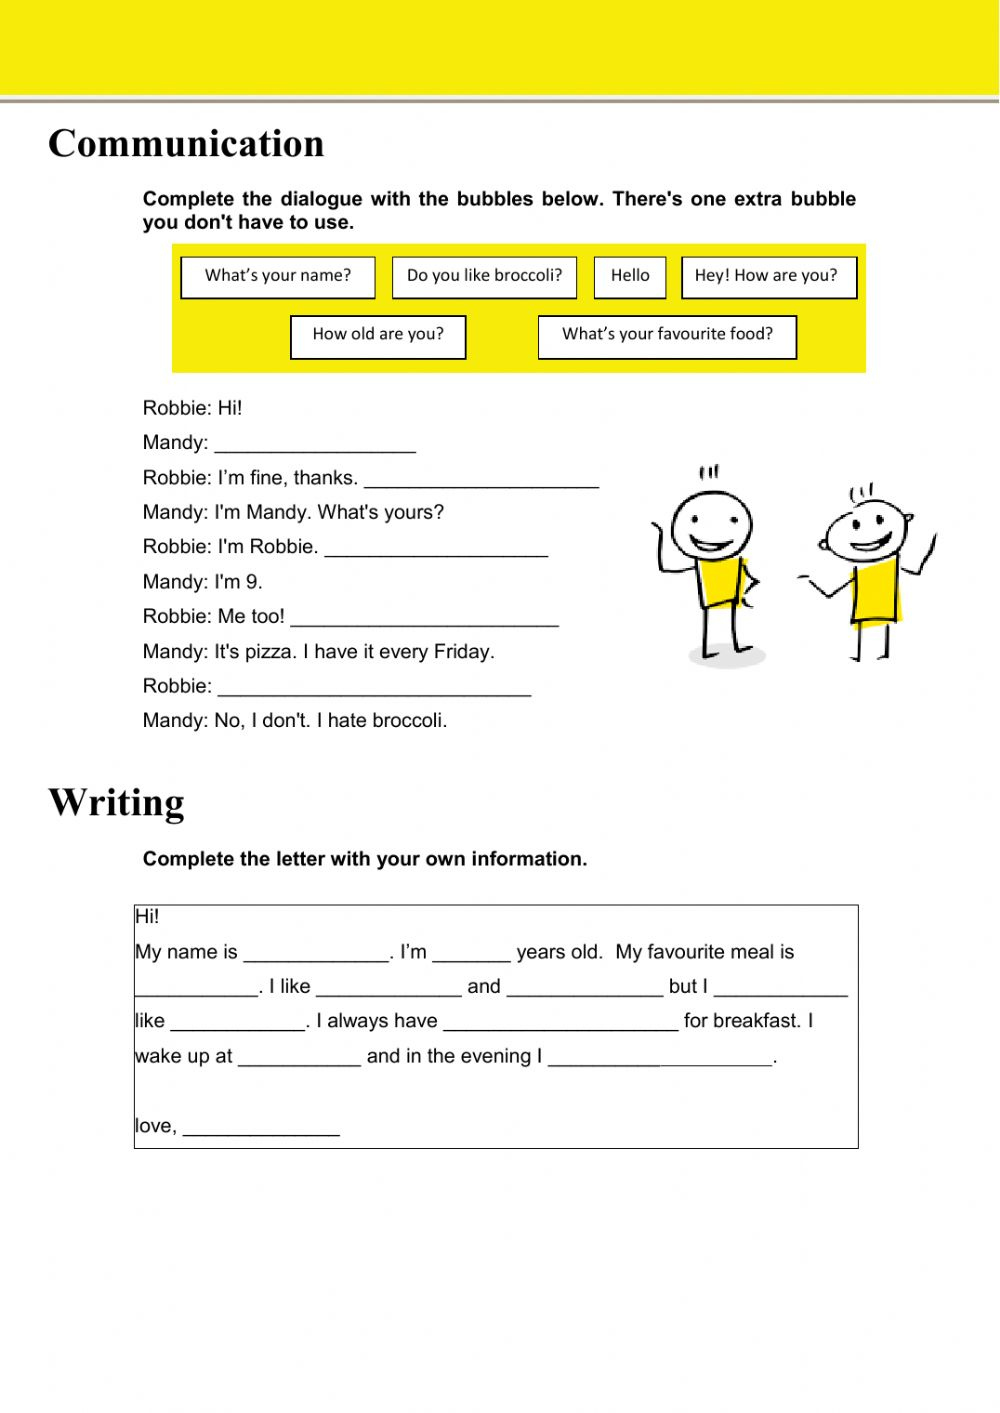 Communication And Writing Interactive Worksheet